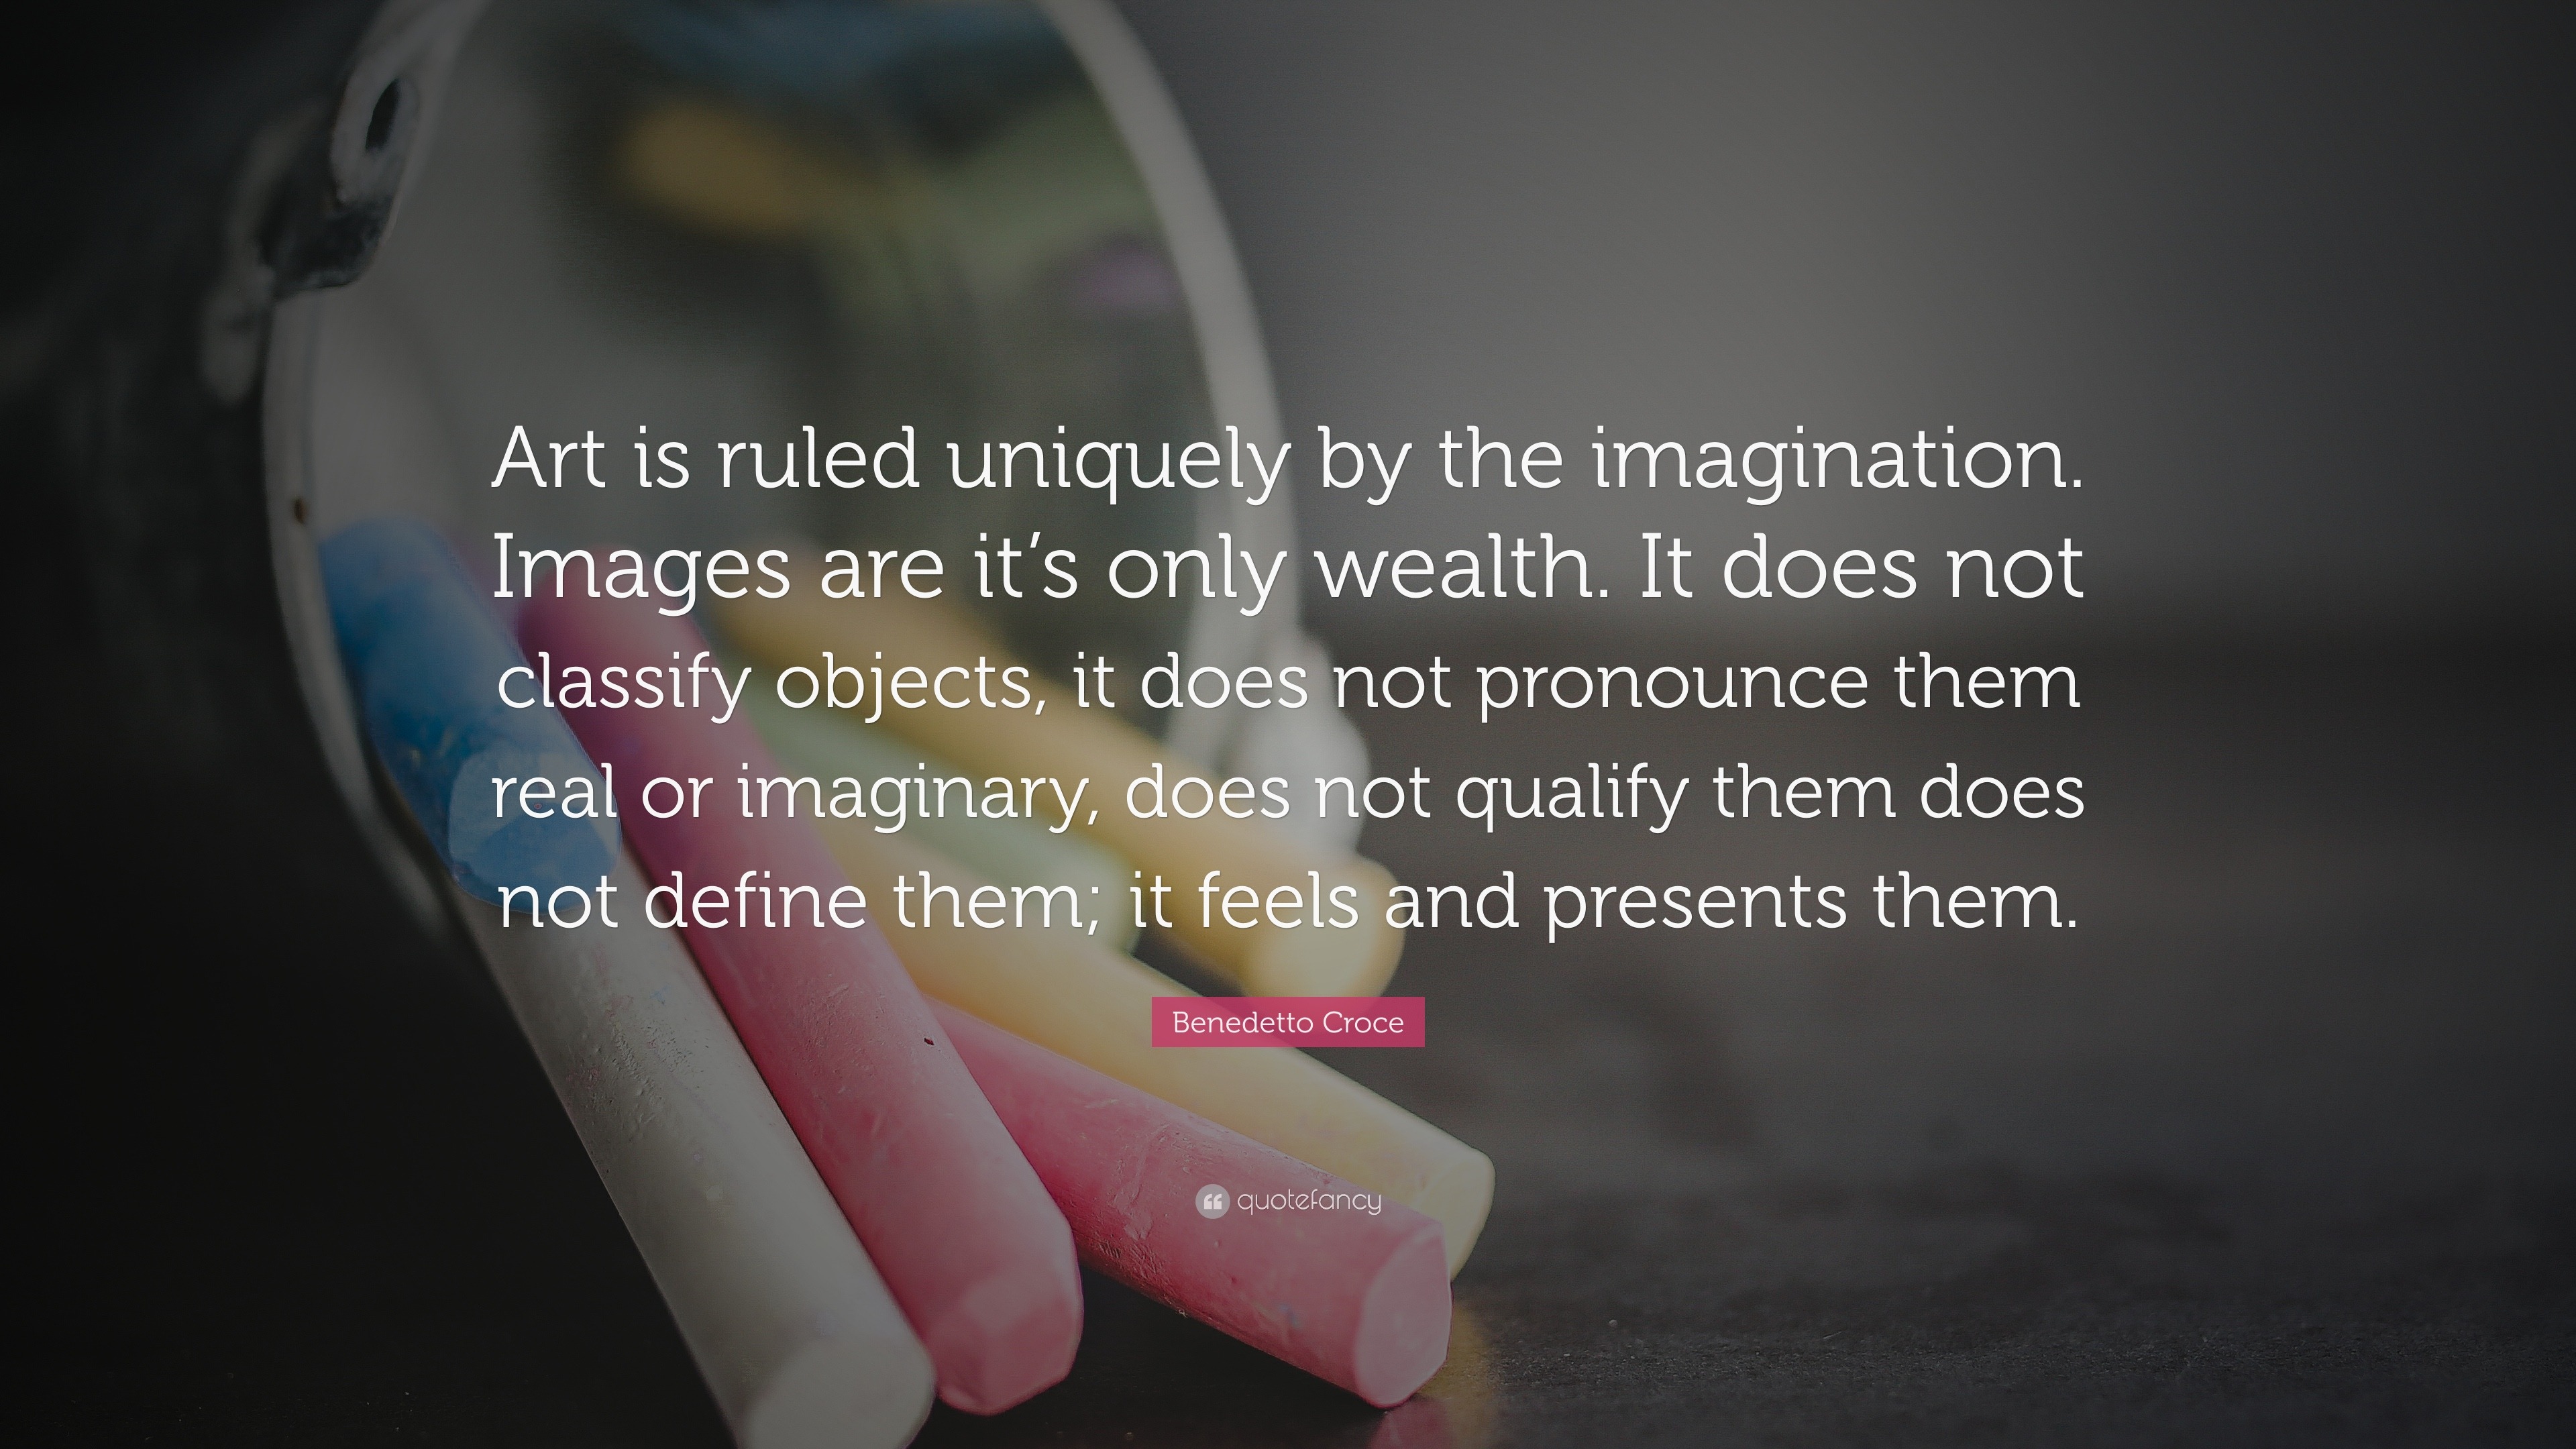 Benedetto Croce Quote: “Art is ruled uniquely by the imagination